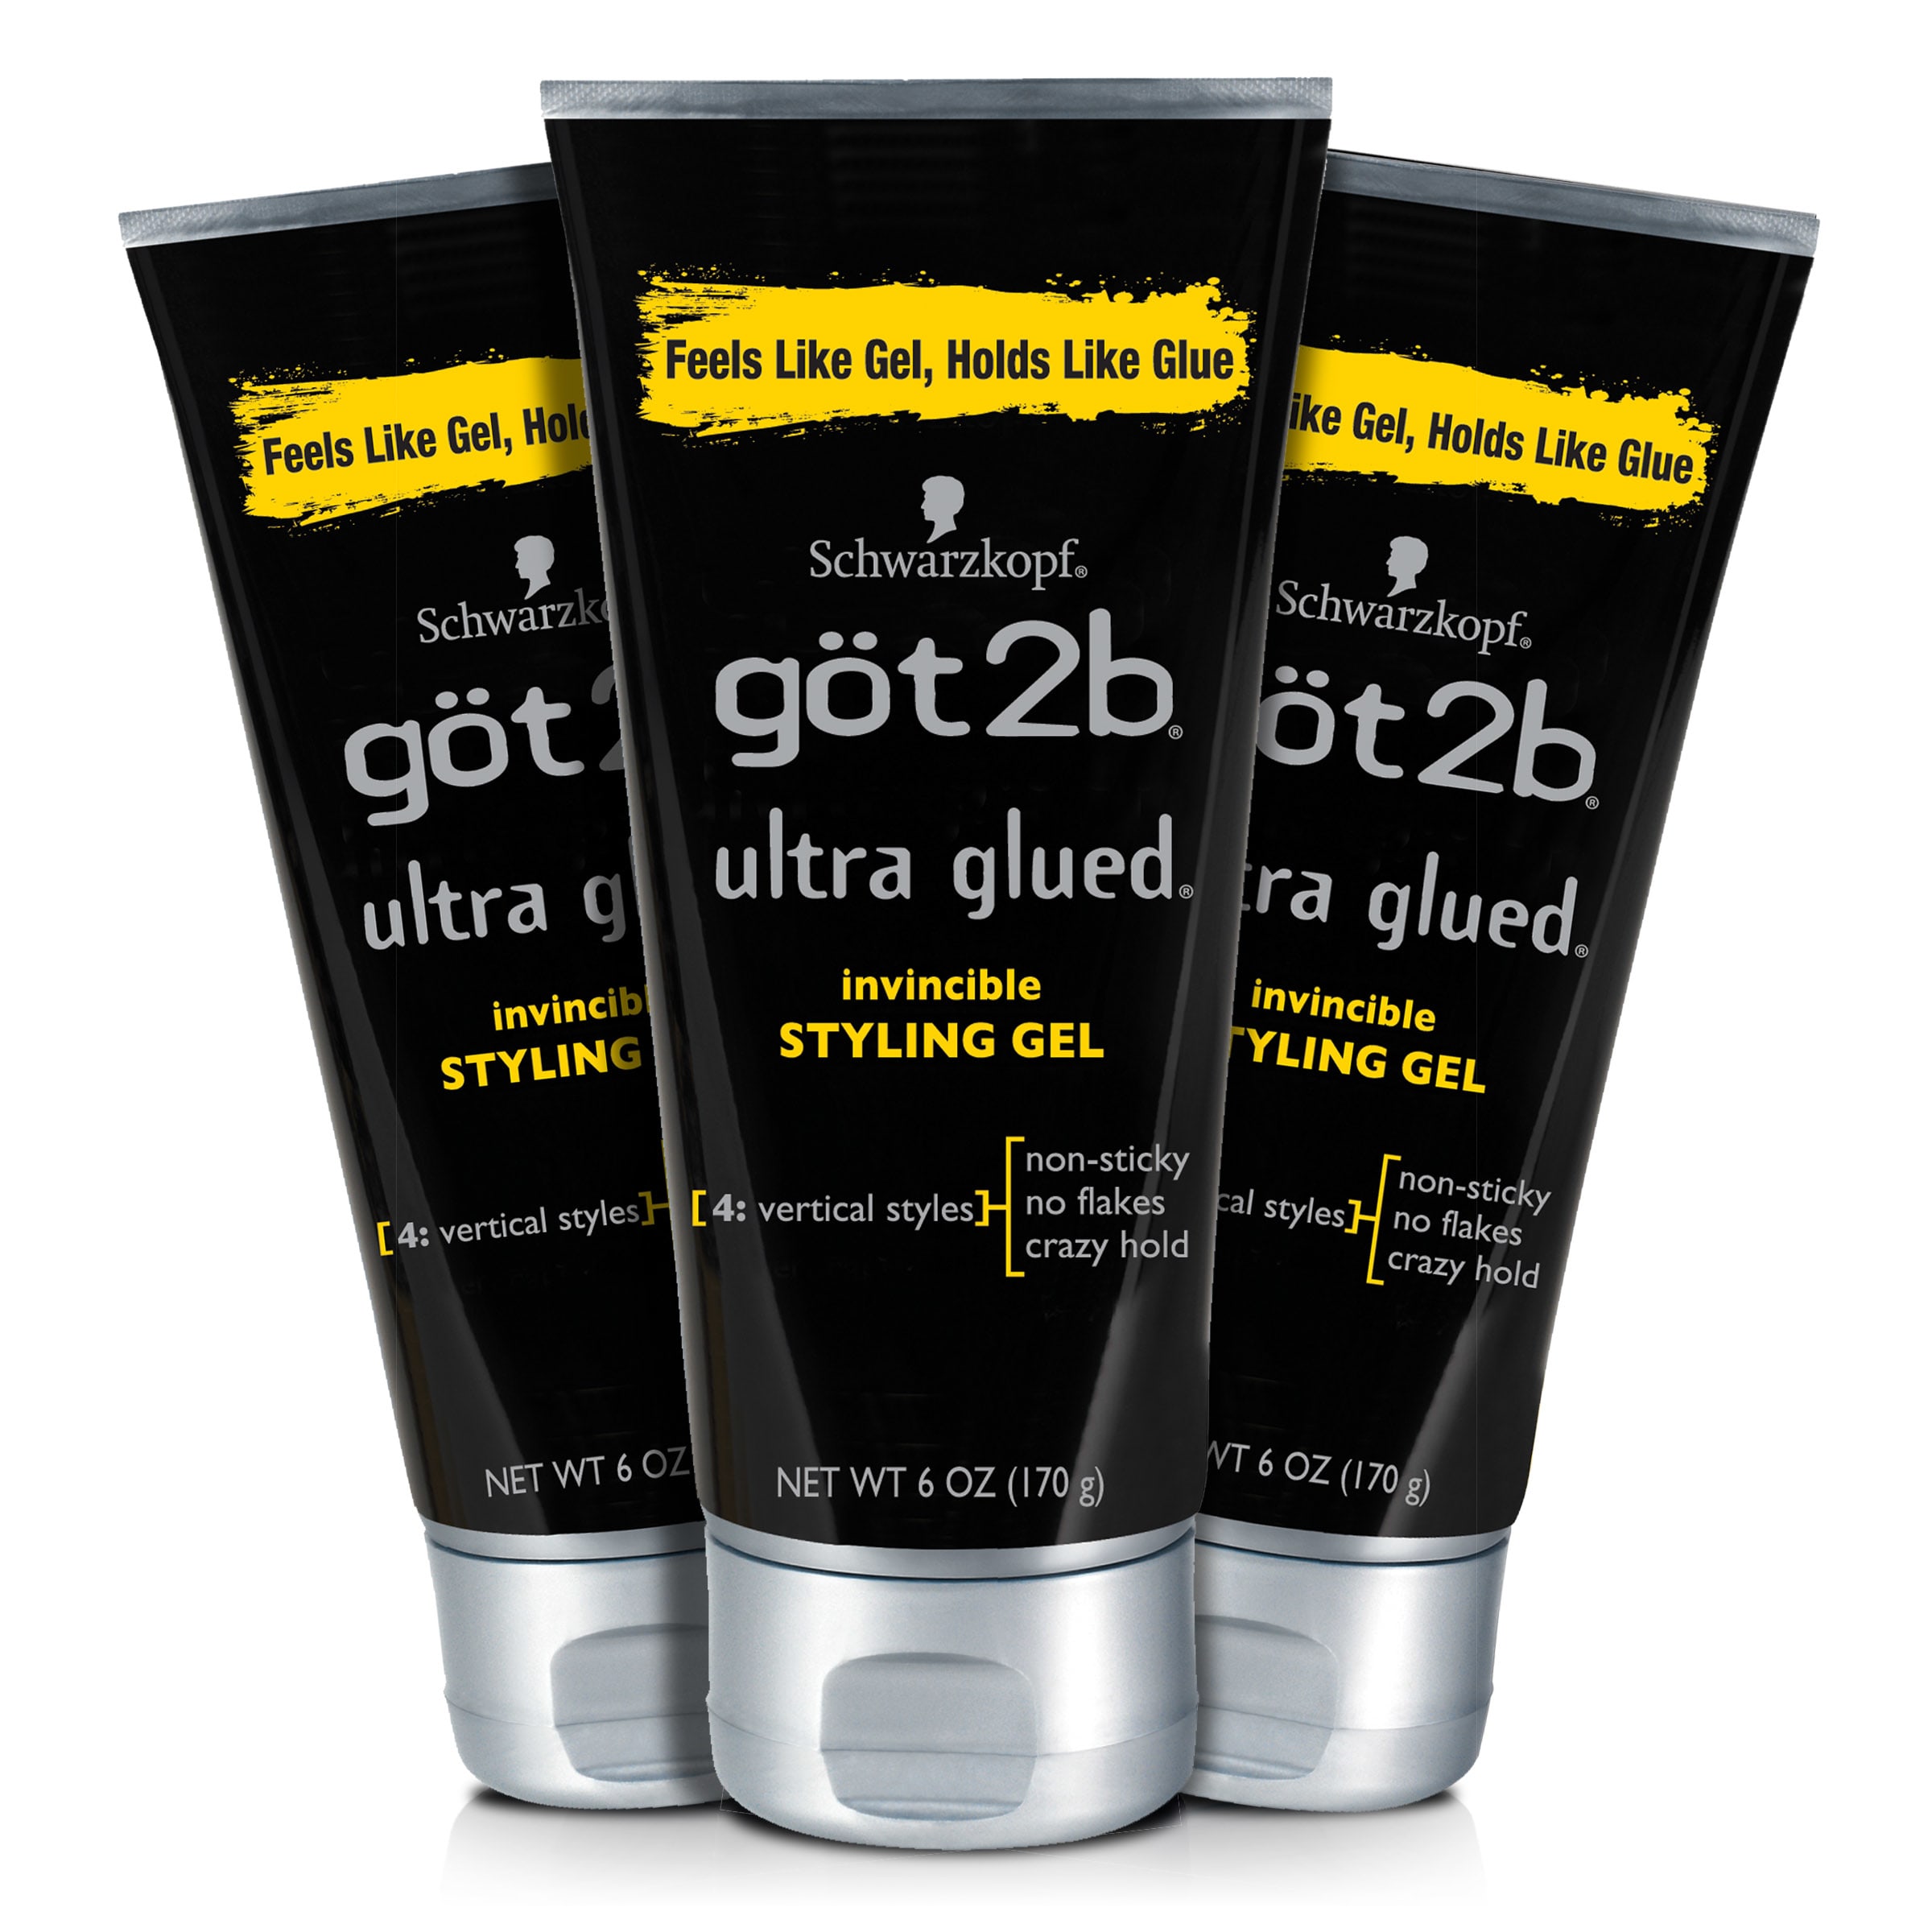 Got2b Ultra Glued Invincible Styling Hair Gel, 6 oz (Count of 3) - image 1 of 9